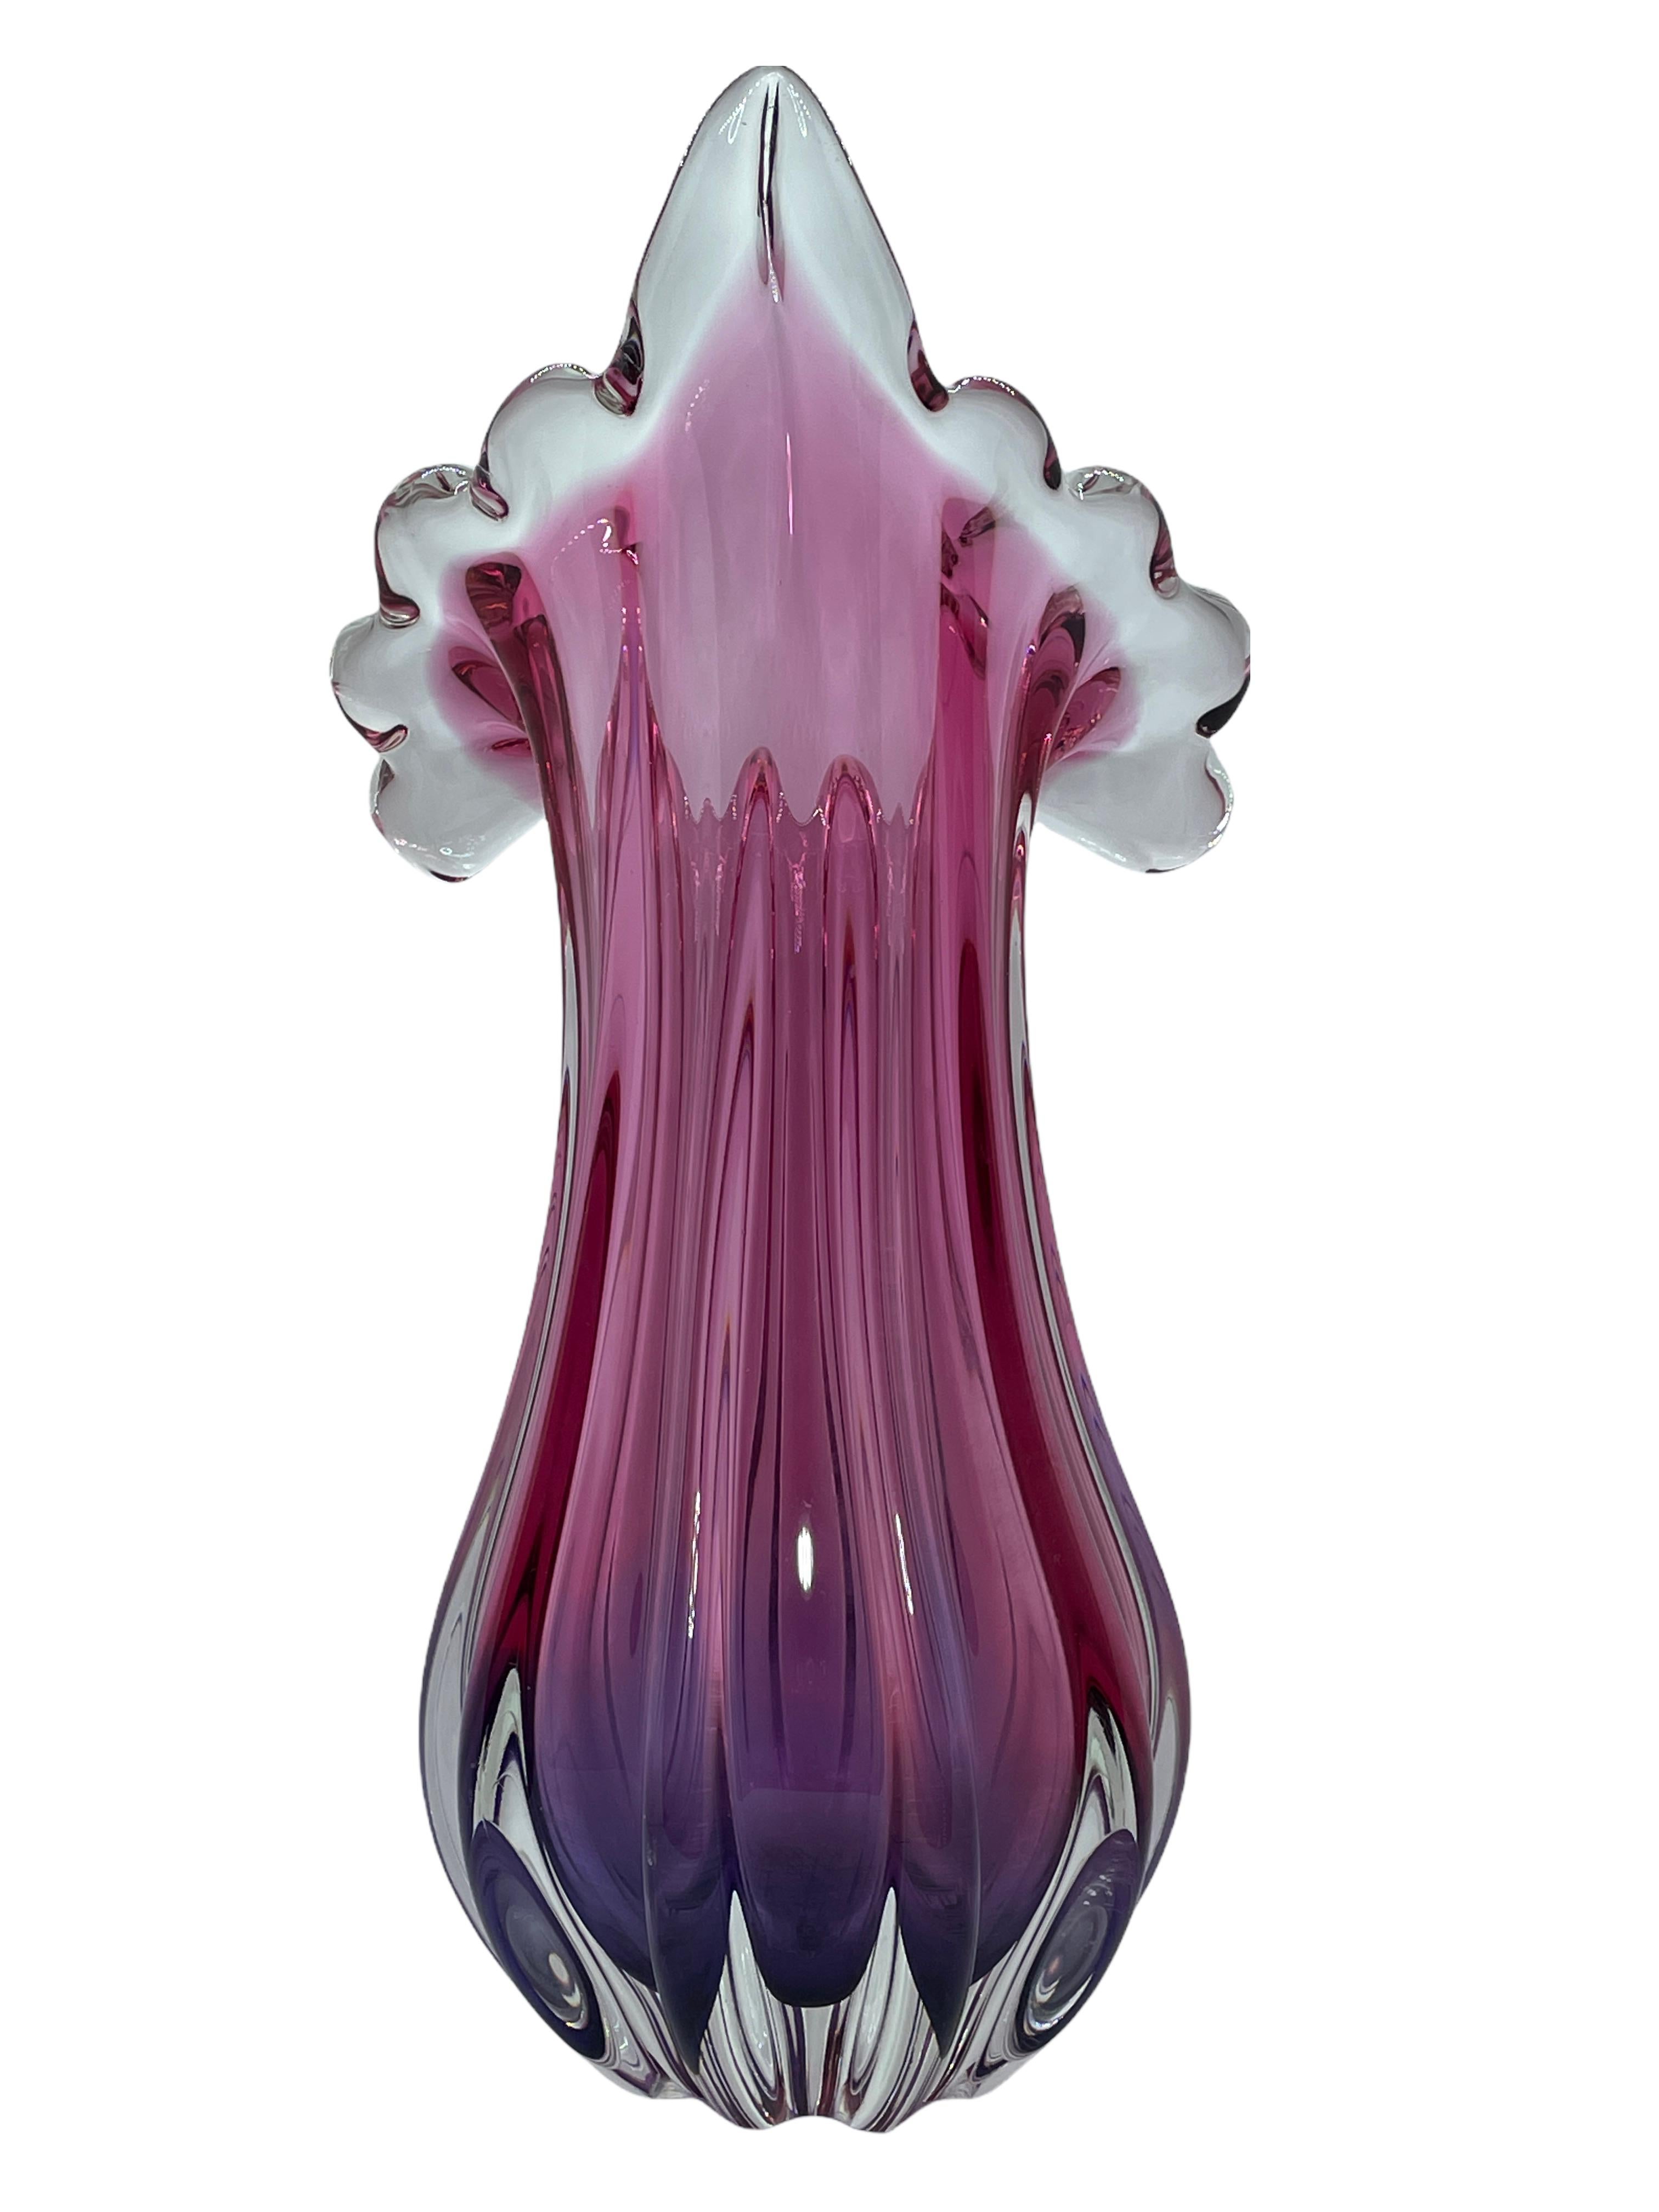 Mid-Century Modern Pink Purple Clear Sommerso Art Glass Vase Object Sculpture Murano, Italy, 1970s